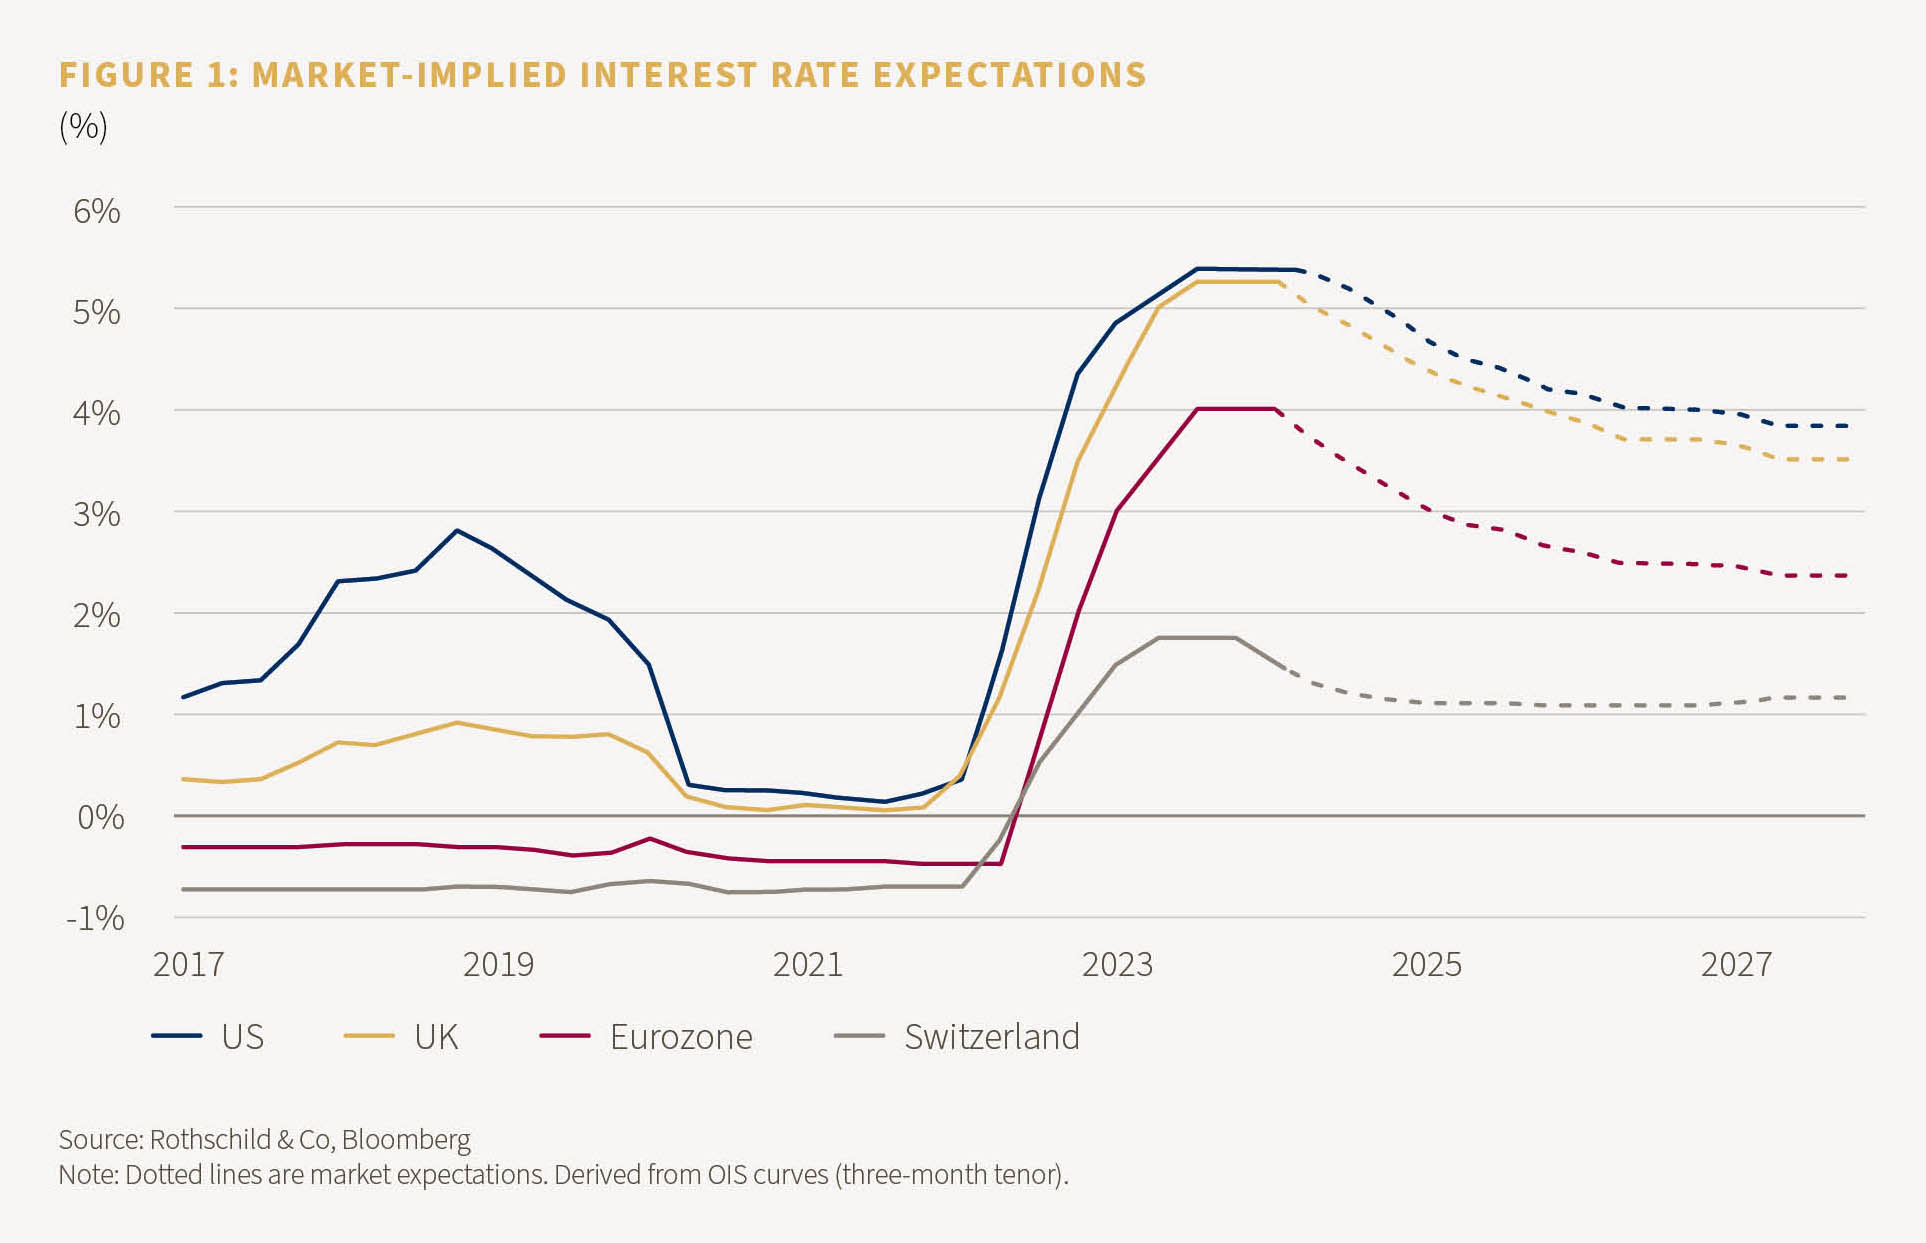 Market-Implied Interest rate expectations from 2017 to 2027